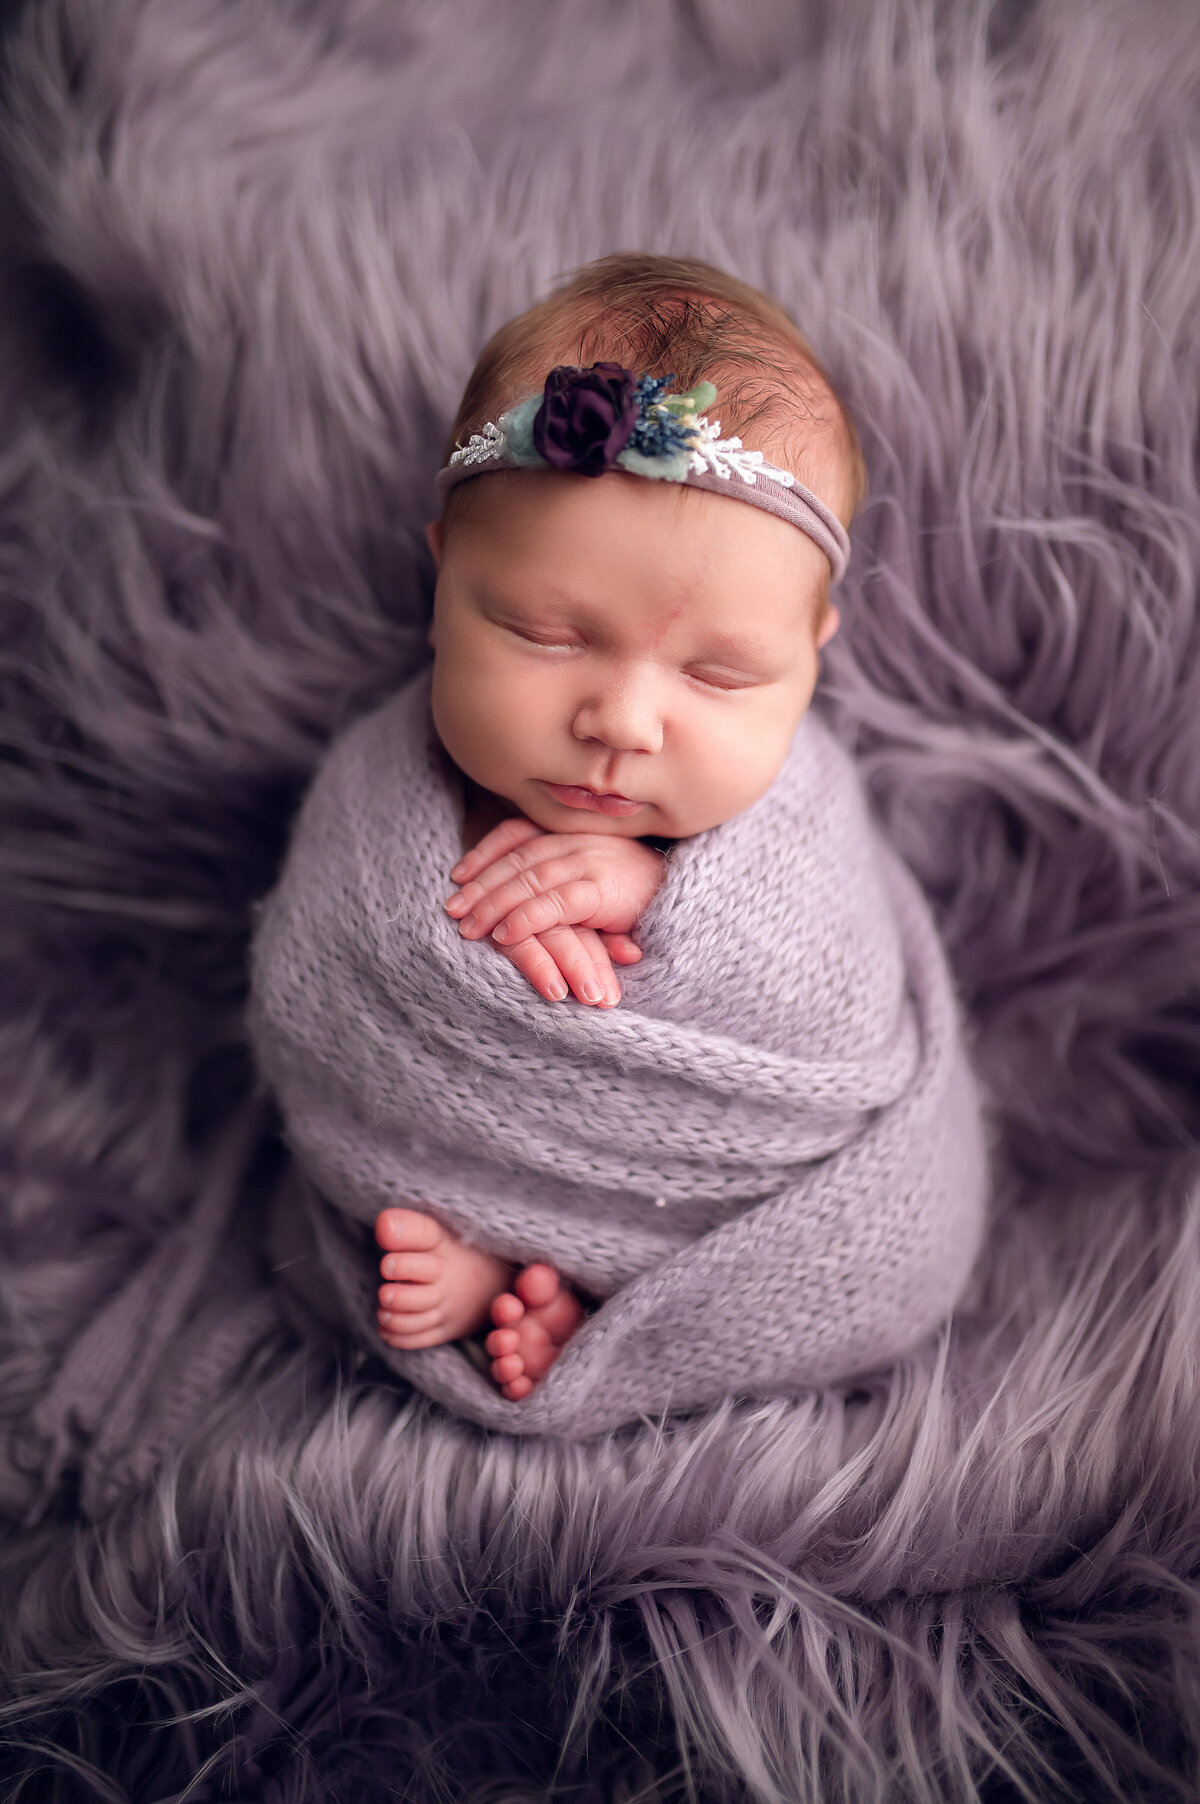 Portrait of newborn baby girl with a lavender motif. Baby is swaddled in soft purple blanket and placed on a lavender, shag backdrop in our Waukesha photo studio.